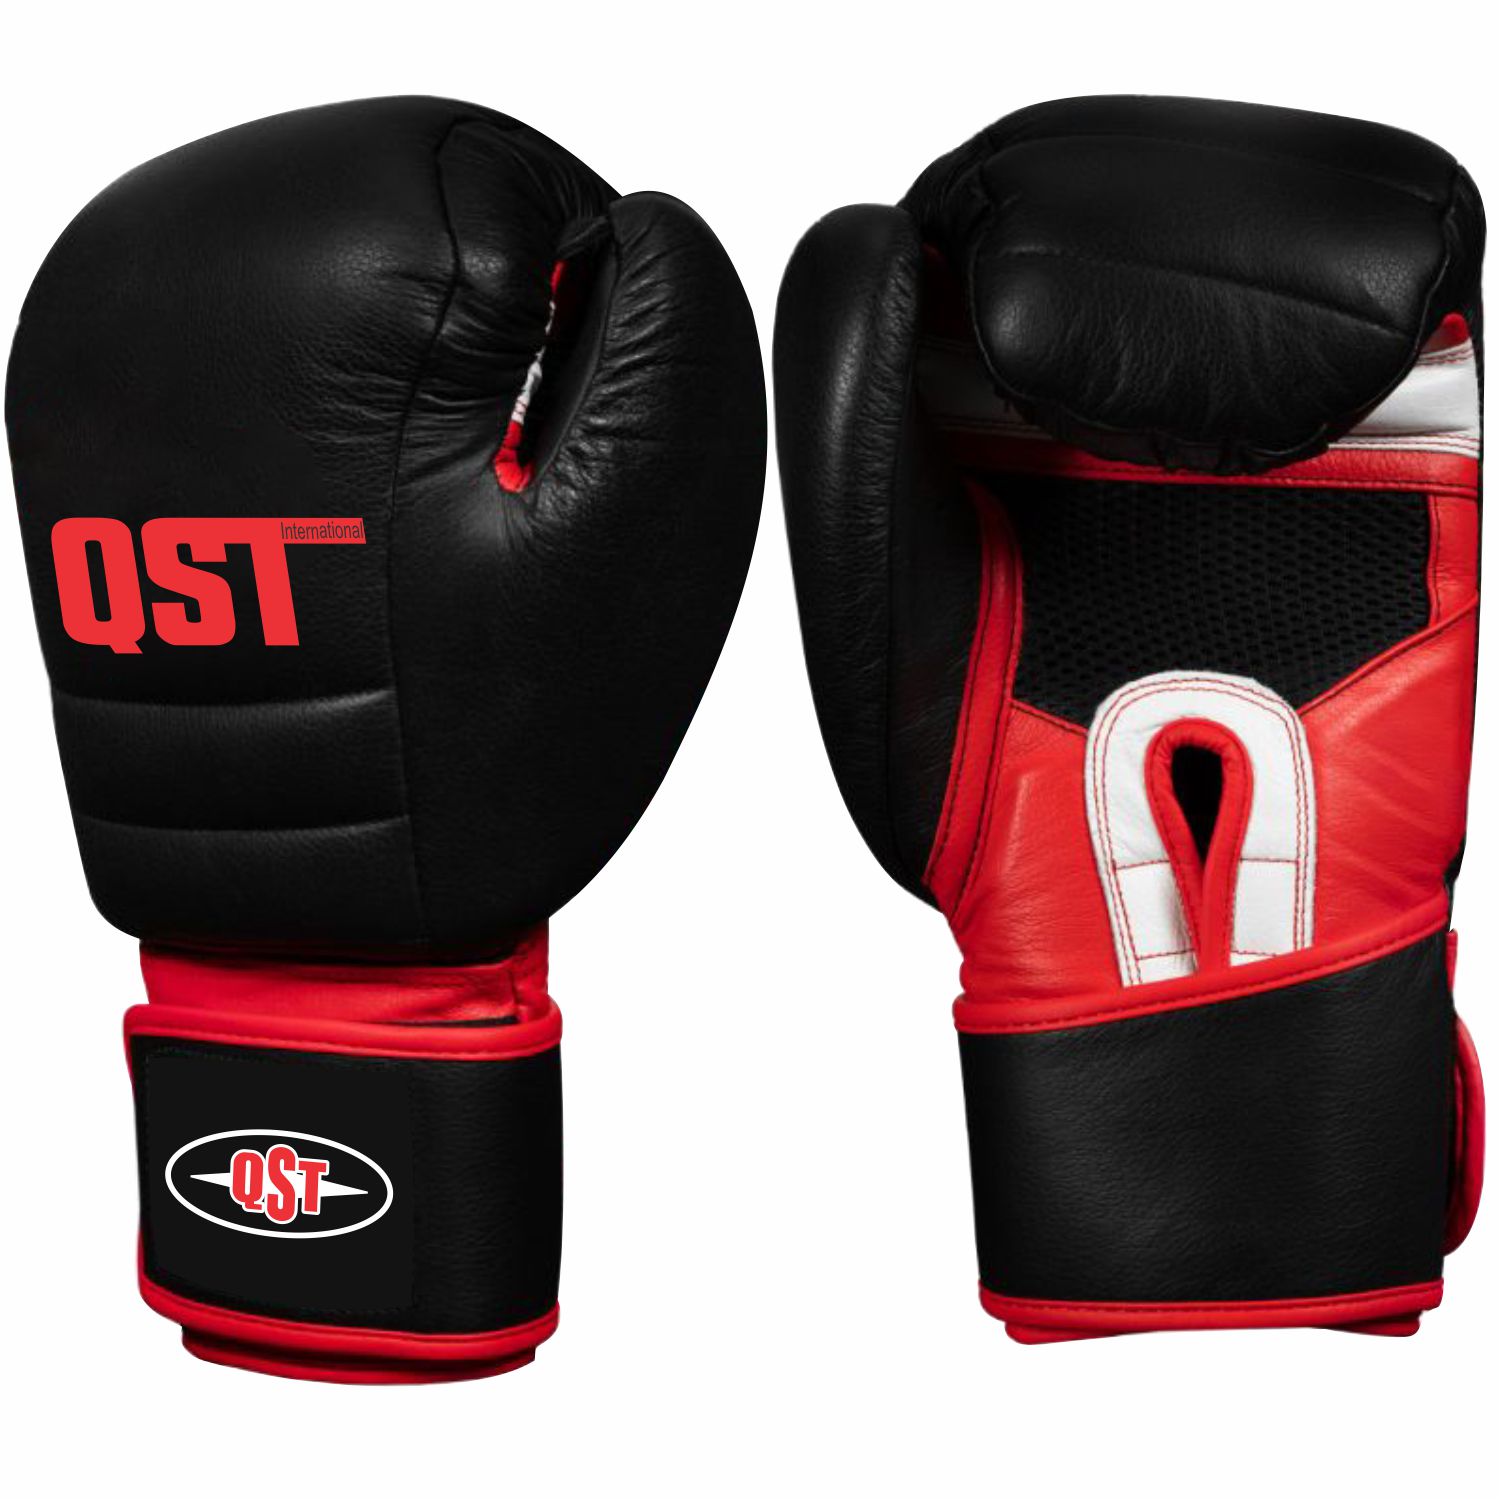 Professional Boxing Gloves - PRG-1525